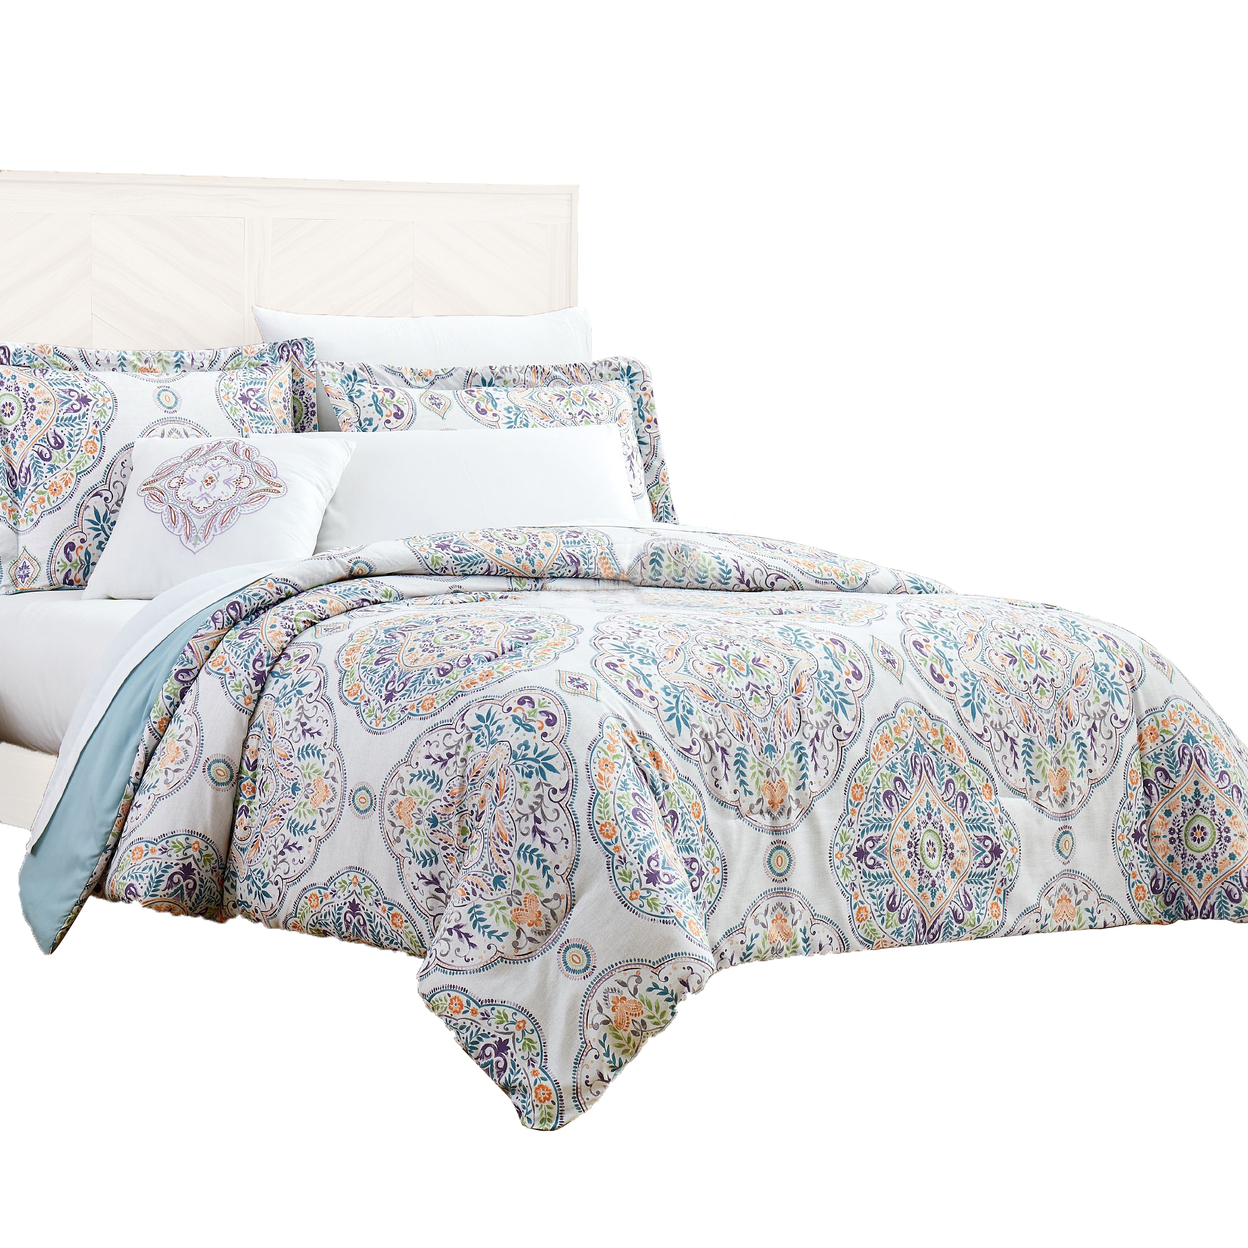 Chania 8 Piece King Bed Set With Floral Print The Urban Port, Multicolor- Saltoro Sherpi